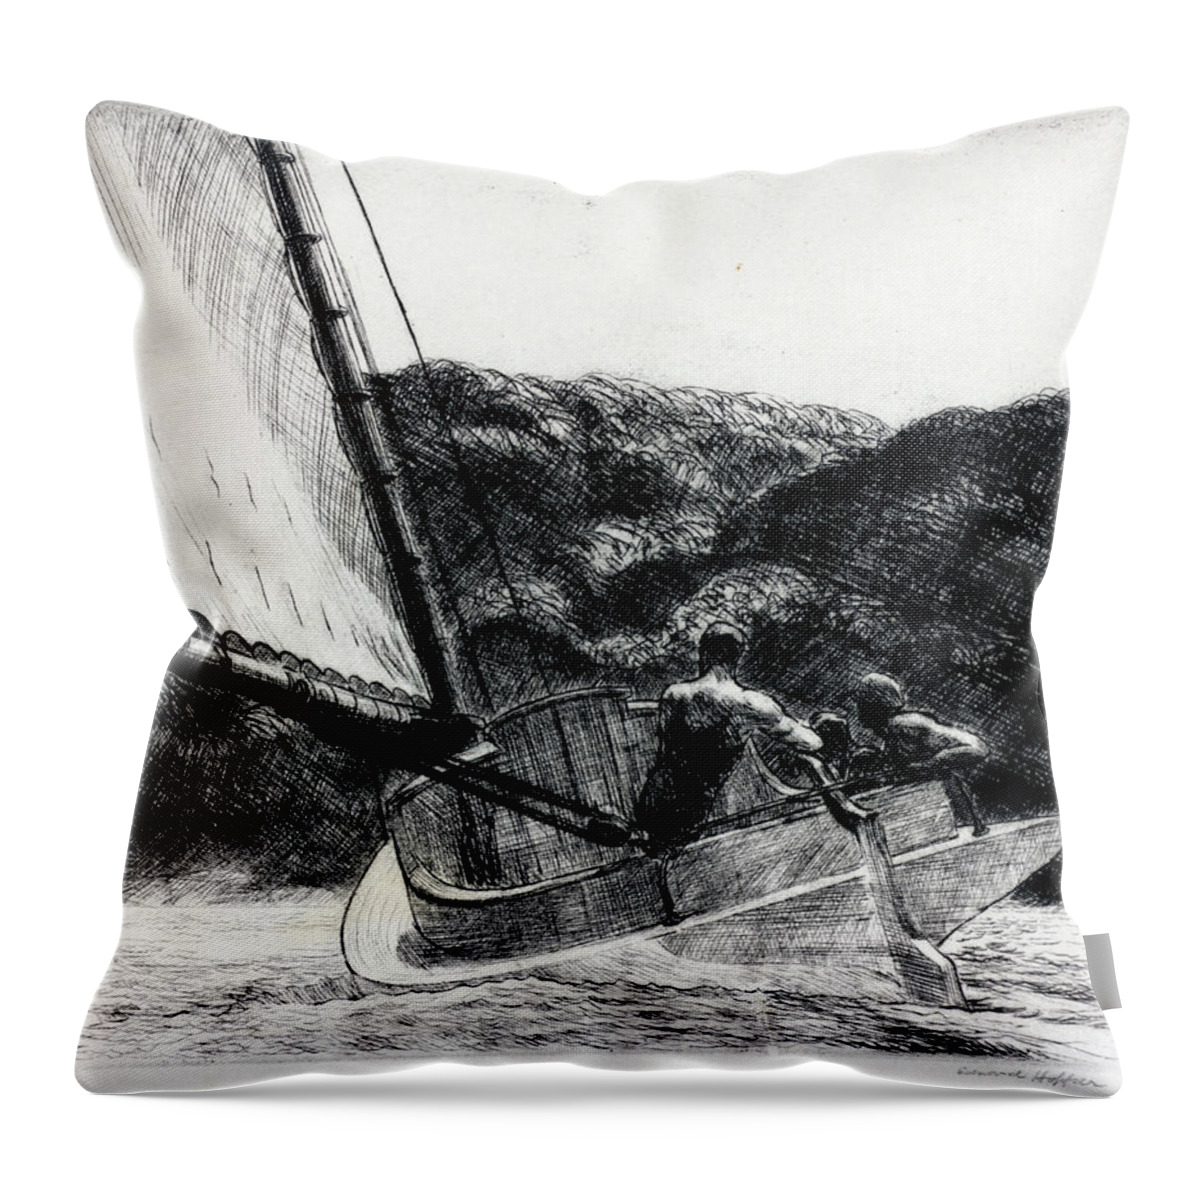 Edward Hopper Throw Pillow featuring the drawing The Cat Boat by Edward Hopper